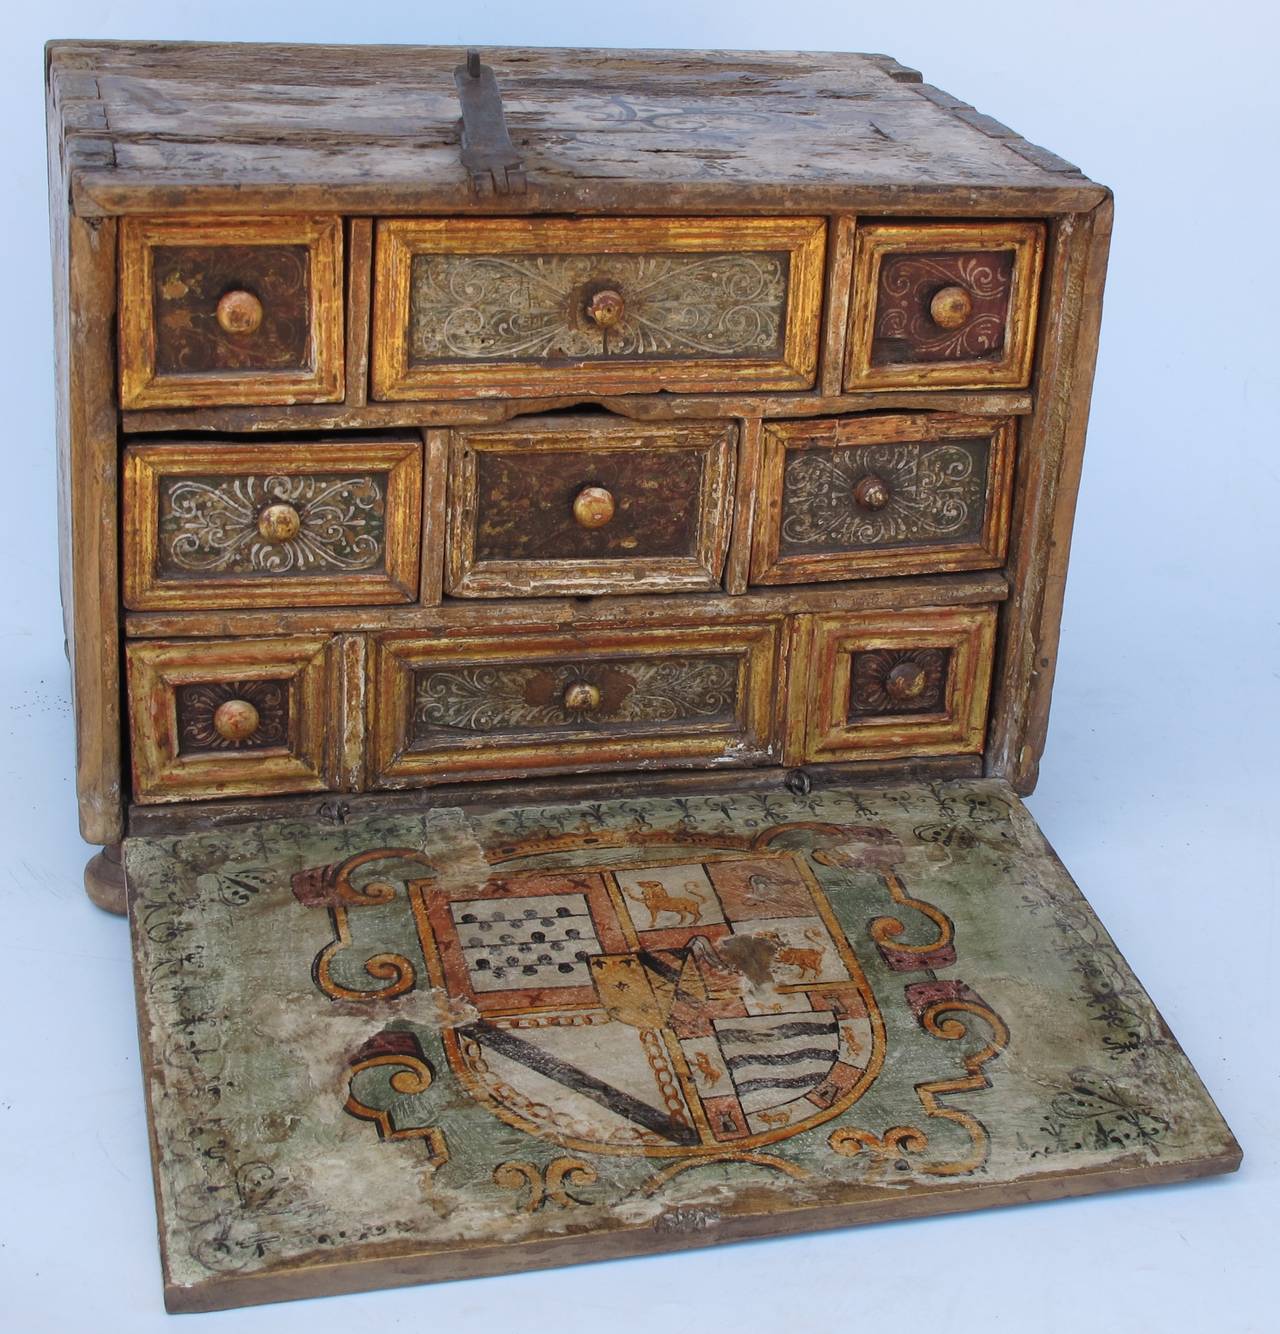 Spanish Colonial table top traveling desk box or 